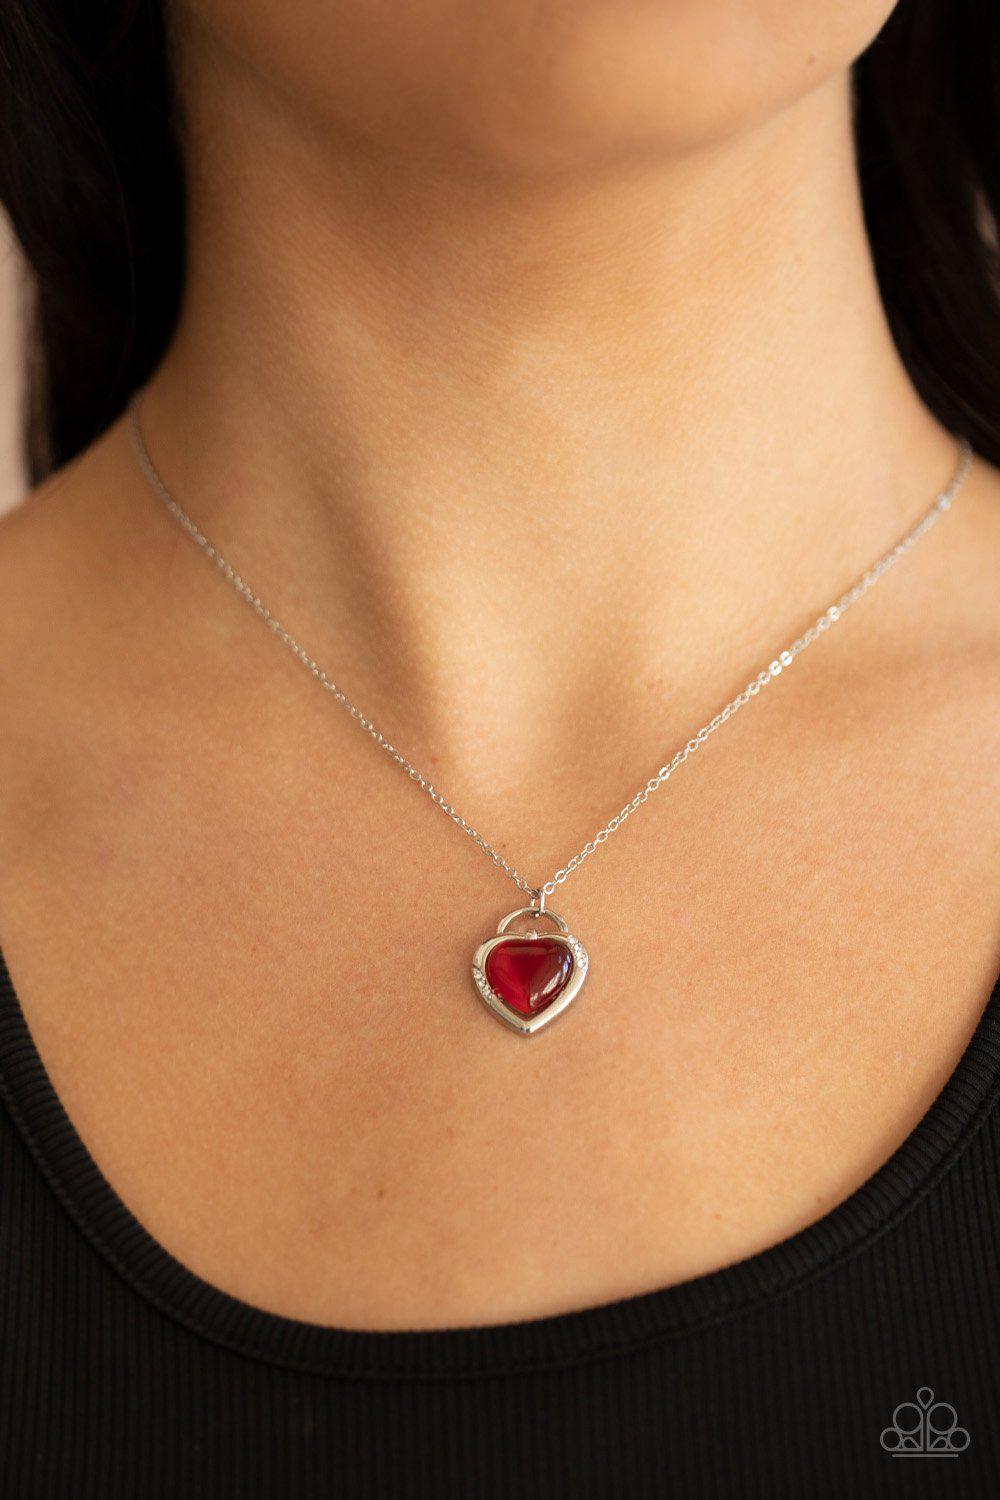 A Dream is a Wish Your Heart Makes Red Cat's Eye Stone Heart Necklace - Paparazzi Accessories - lightbox -CarasShop.com - $5 Jewelry by Cara Jewels